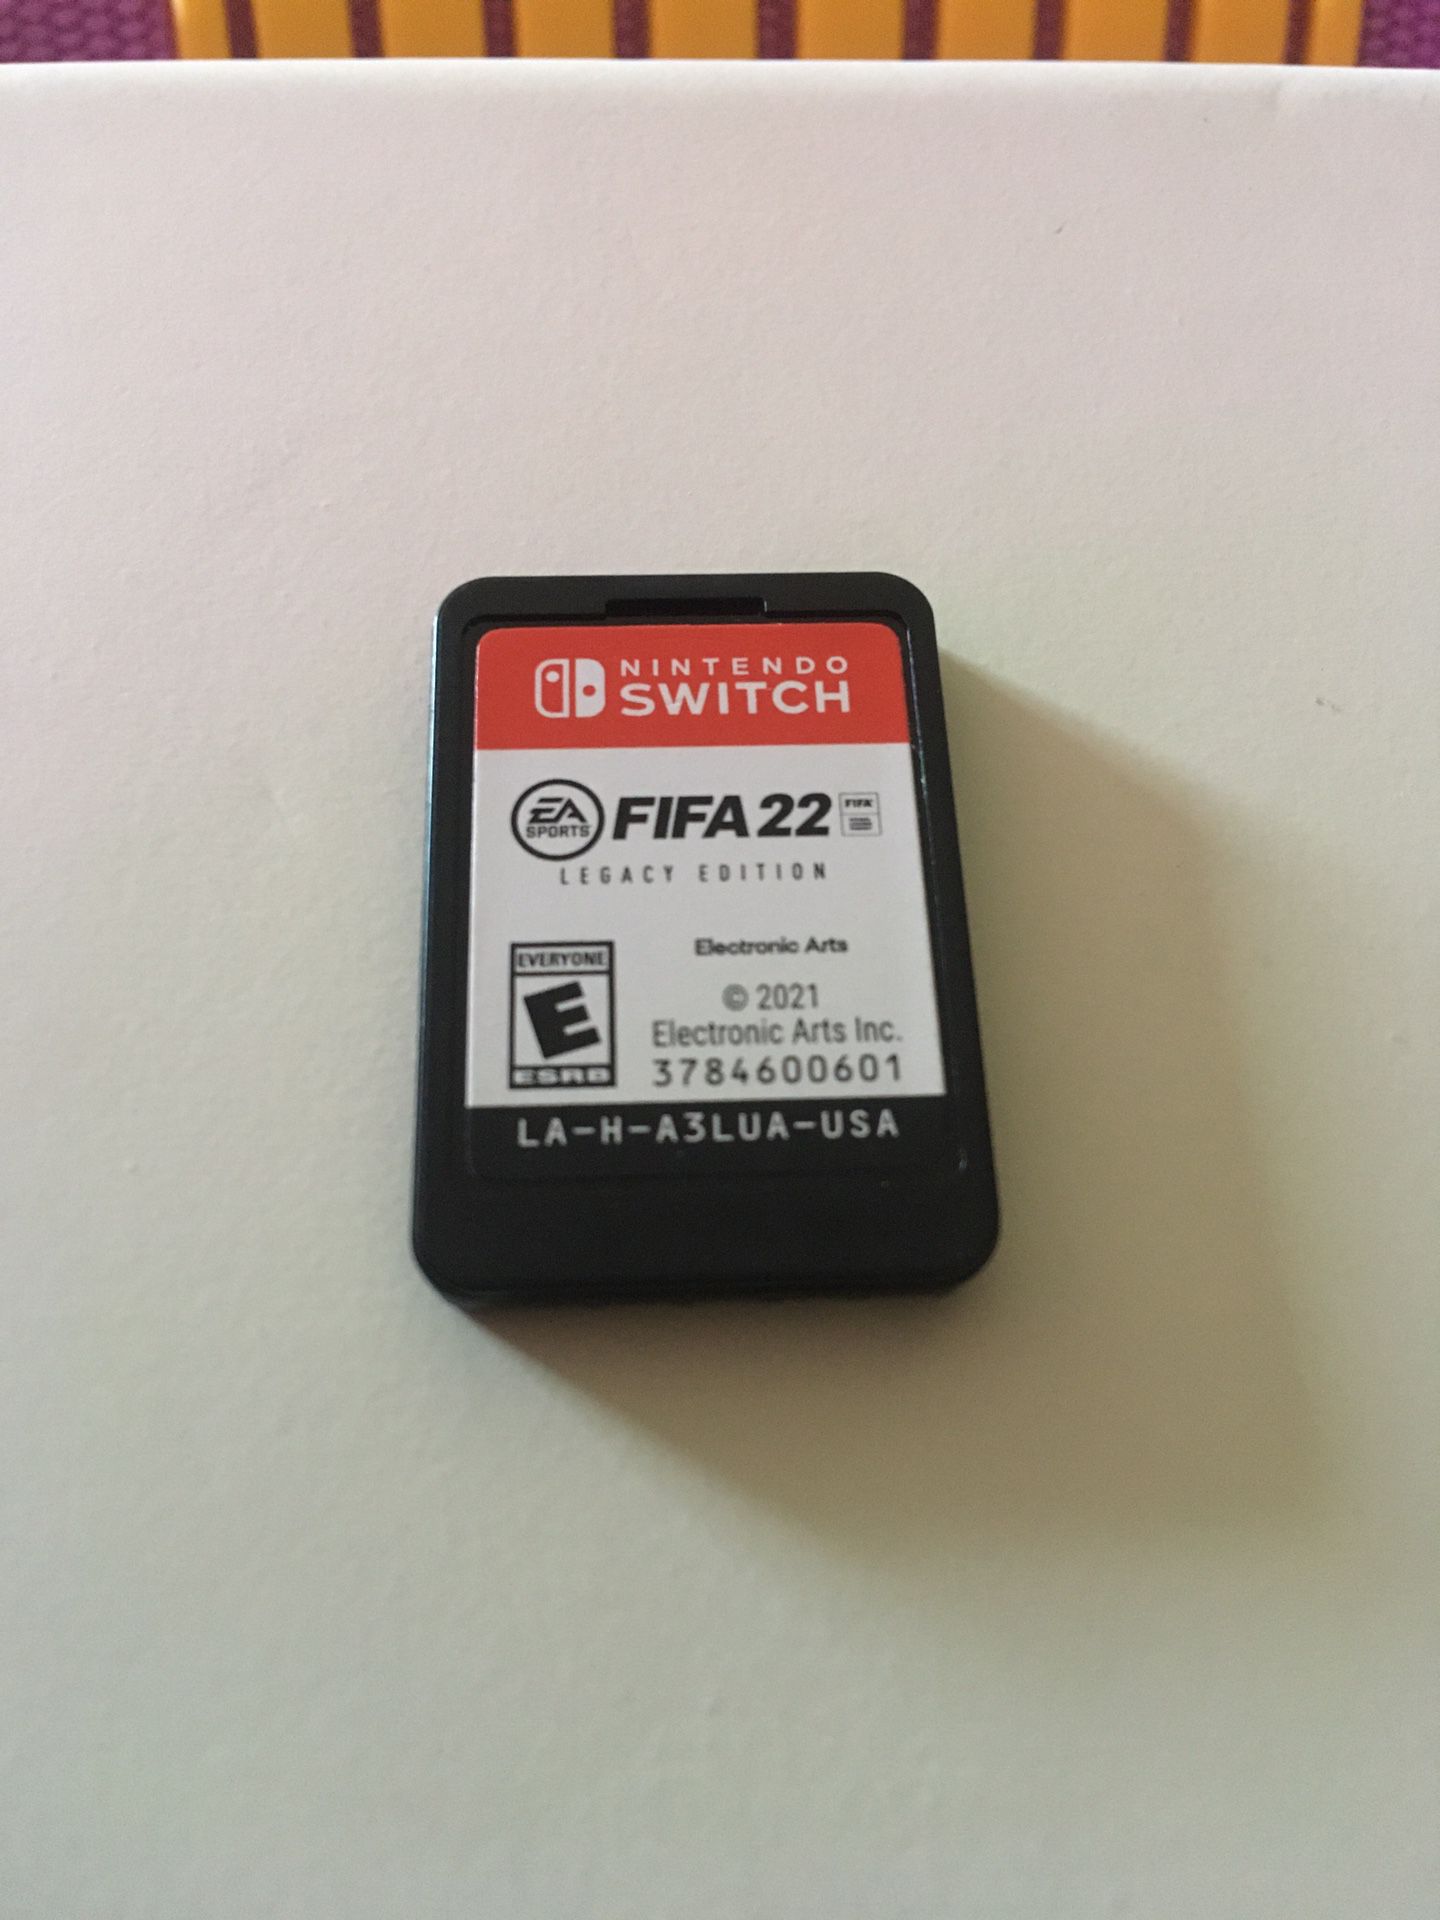 FIFA 22 LEGACY - OfferUp for Gainesville, Sale EDITION FL (NINTENDO SWITCH) in